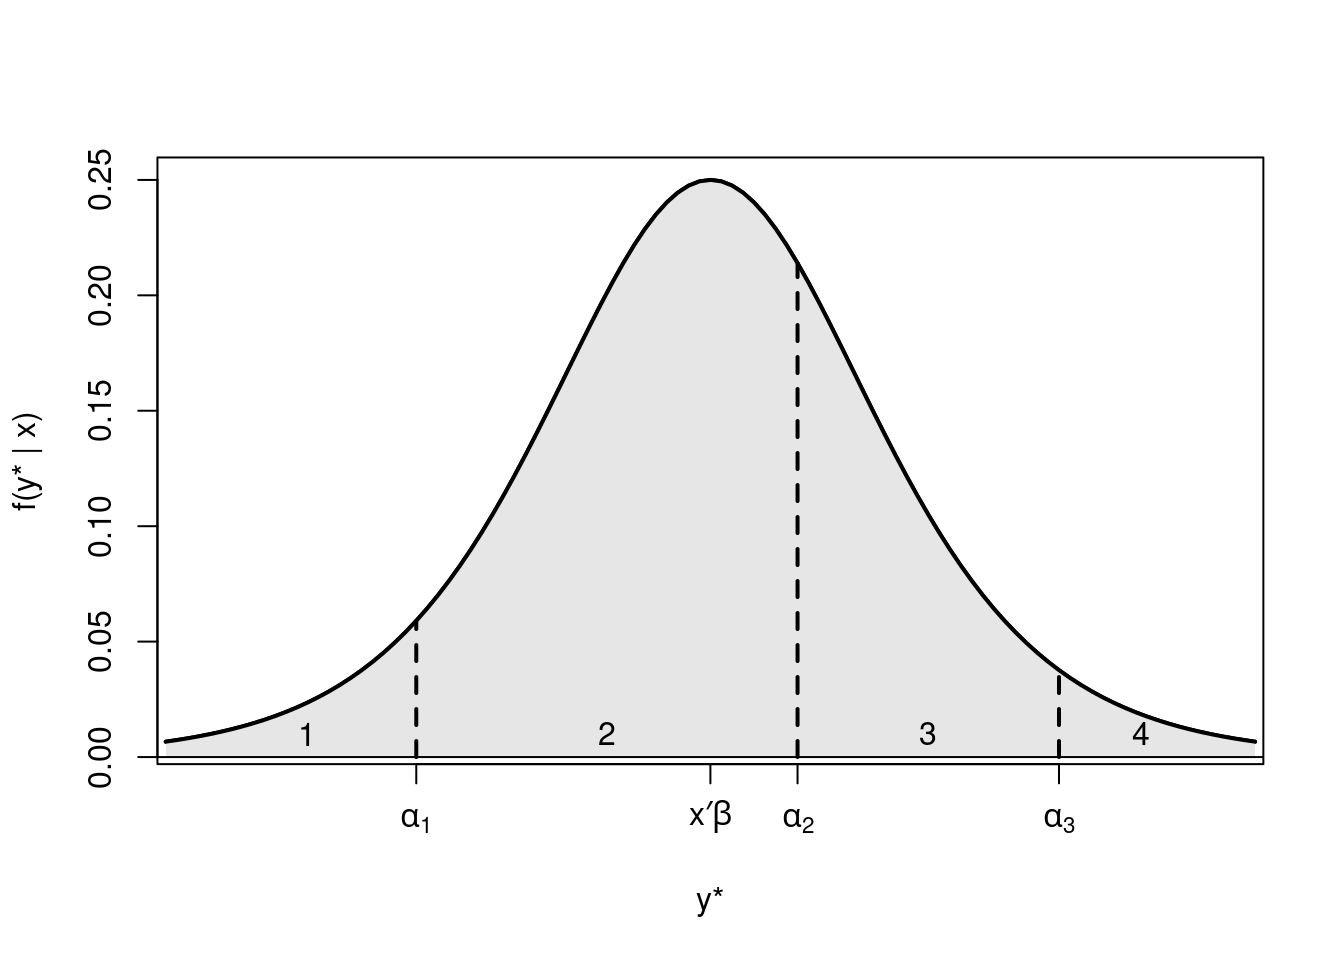 Distribution of the latent variable y* divided into four categories